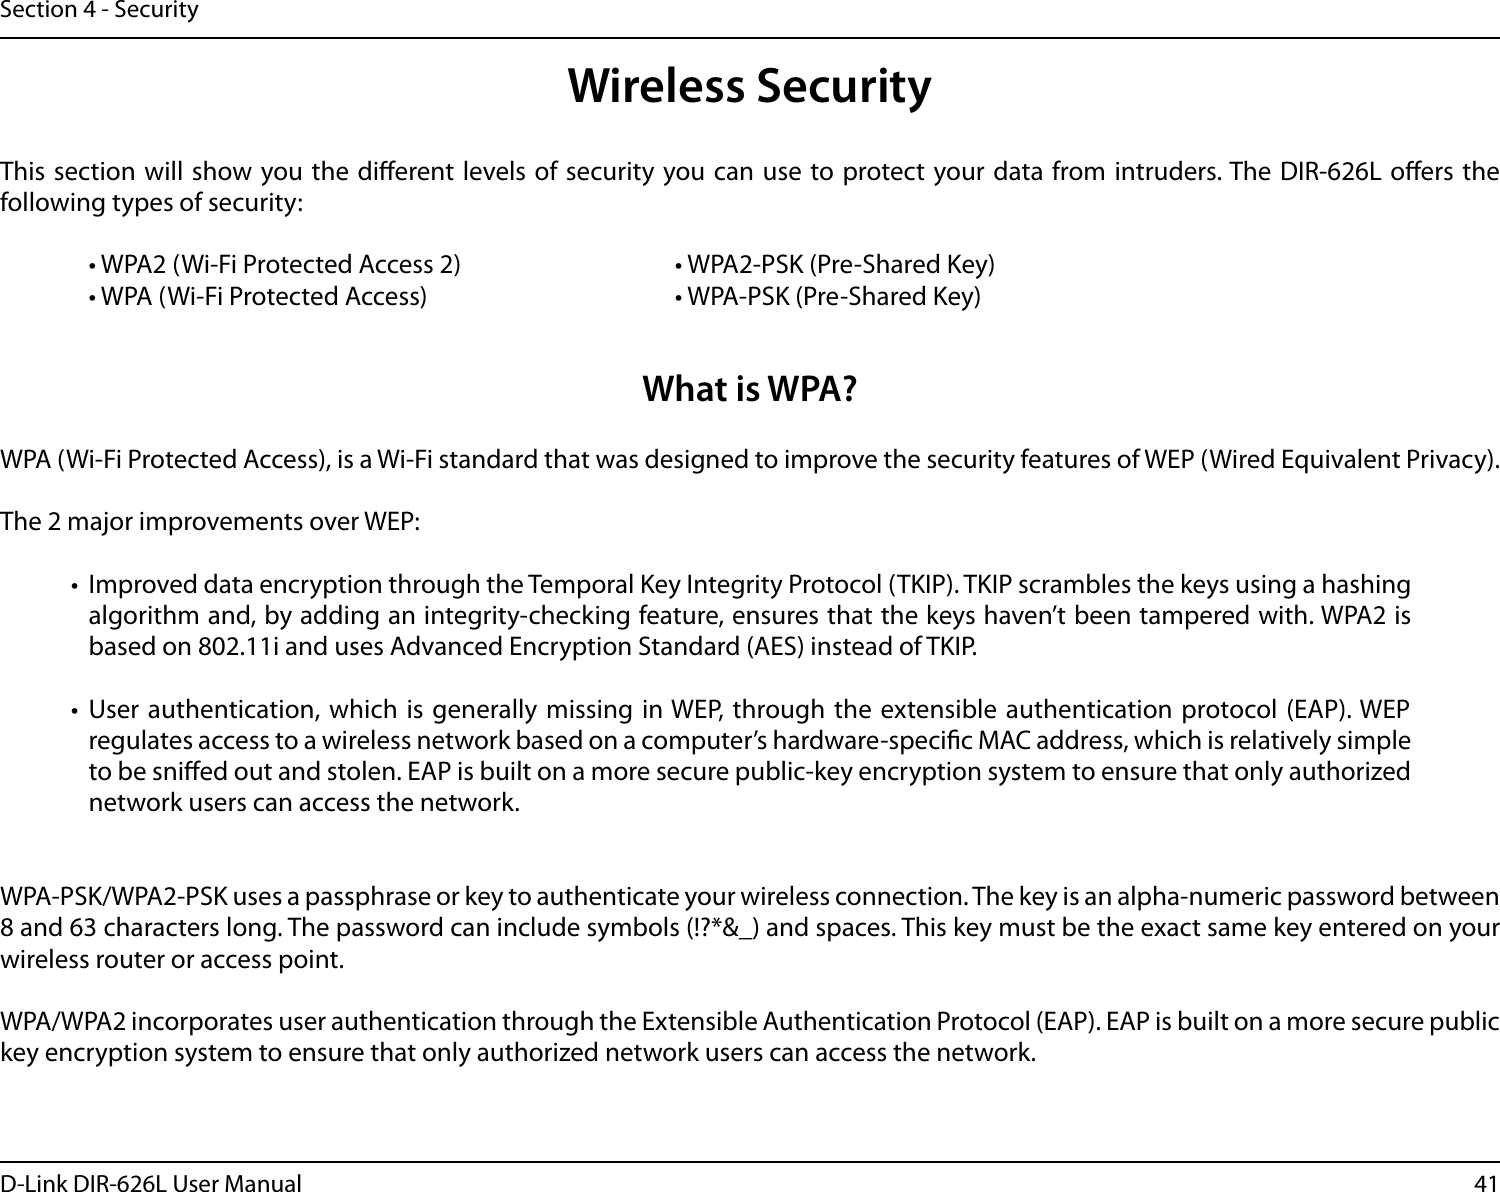 41D-Link DIR-626L User ManualSection 4 - SecurityWireless SecurityThis section will  show you the  dierent levels of security  you can use to protect your data from intruders. The DIR-626L  oers the following types of security:  • WPA2 (Wi-Fi Protected Access 2)       • WPA2-PSK (Pre-Shared Key)  • WPA (Wi-Fi Protected Access)        • WPA-PSK (Pre-Shared Key)What is WPA?WPA (Wi-Fi Protected Access), is a Wi-Fi standard that was designed to improve the security features of WEP (Wired Equivalent Privacy).  The 2 major improvements over WEP: •  Improved data encryption through the Temporal Key Integrity Protocol (TKIP). TKIP scrambles the keys using a hashing algorithm and, by adding an integrity-checking feature, ensures that the keys haven’t been tampered with. WPA2 is based on 802.11i and uses Advanced Encryption Standard (AES) instead of TKIP.•  User authentication, which is  generally missing  in WEP, through the extensible authentication protocol (EAP). WEP regulates access to a wireless network based on a computer’s hardware-specic MAC address, which is relatively simple to be snied out and stolen. EAP is built on a more secure public-key encryption system to ensure that only authorized network users can access the network.WPA-PSK/WPA2-PSK uses a passphrase or key to authenticate your wireless connection. The key is an alpha-numeric password between 8 and 63 characters long. The password can include symbols (!?*&amp;_) and spaces. This key must be the exact same key entered on your wireless router or access point.WPA/WPA2 incorporates user authentication through the Extensible Authentication Protocol (EAP). EAP is built on a more secure public key encryption system to ensure that only authorized network users can access the network.